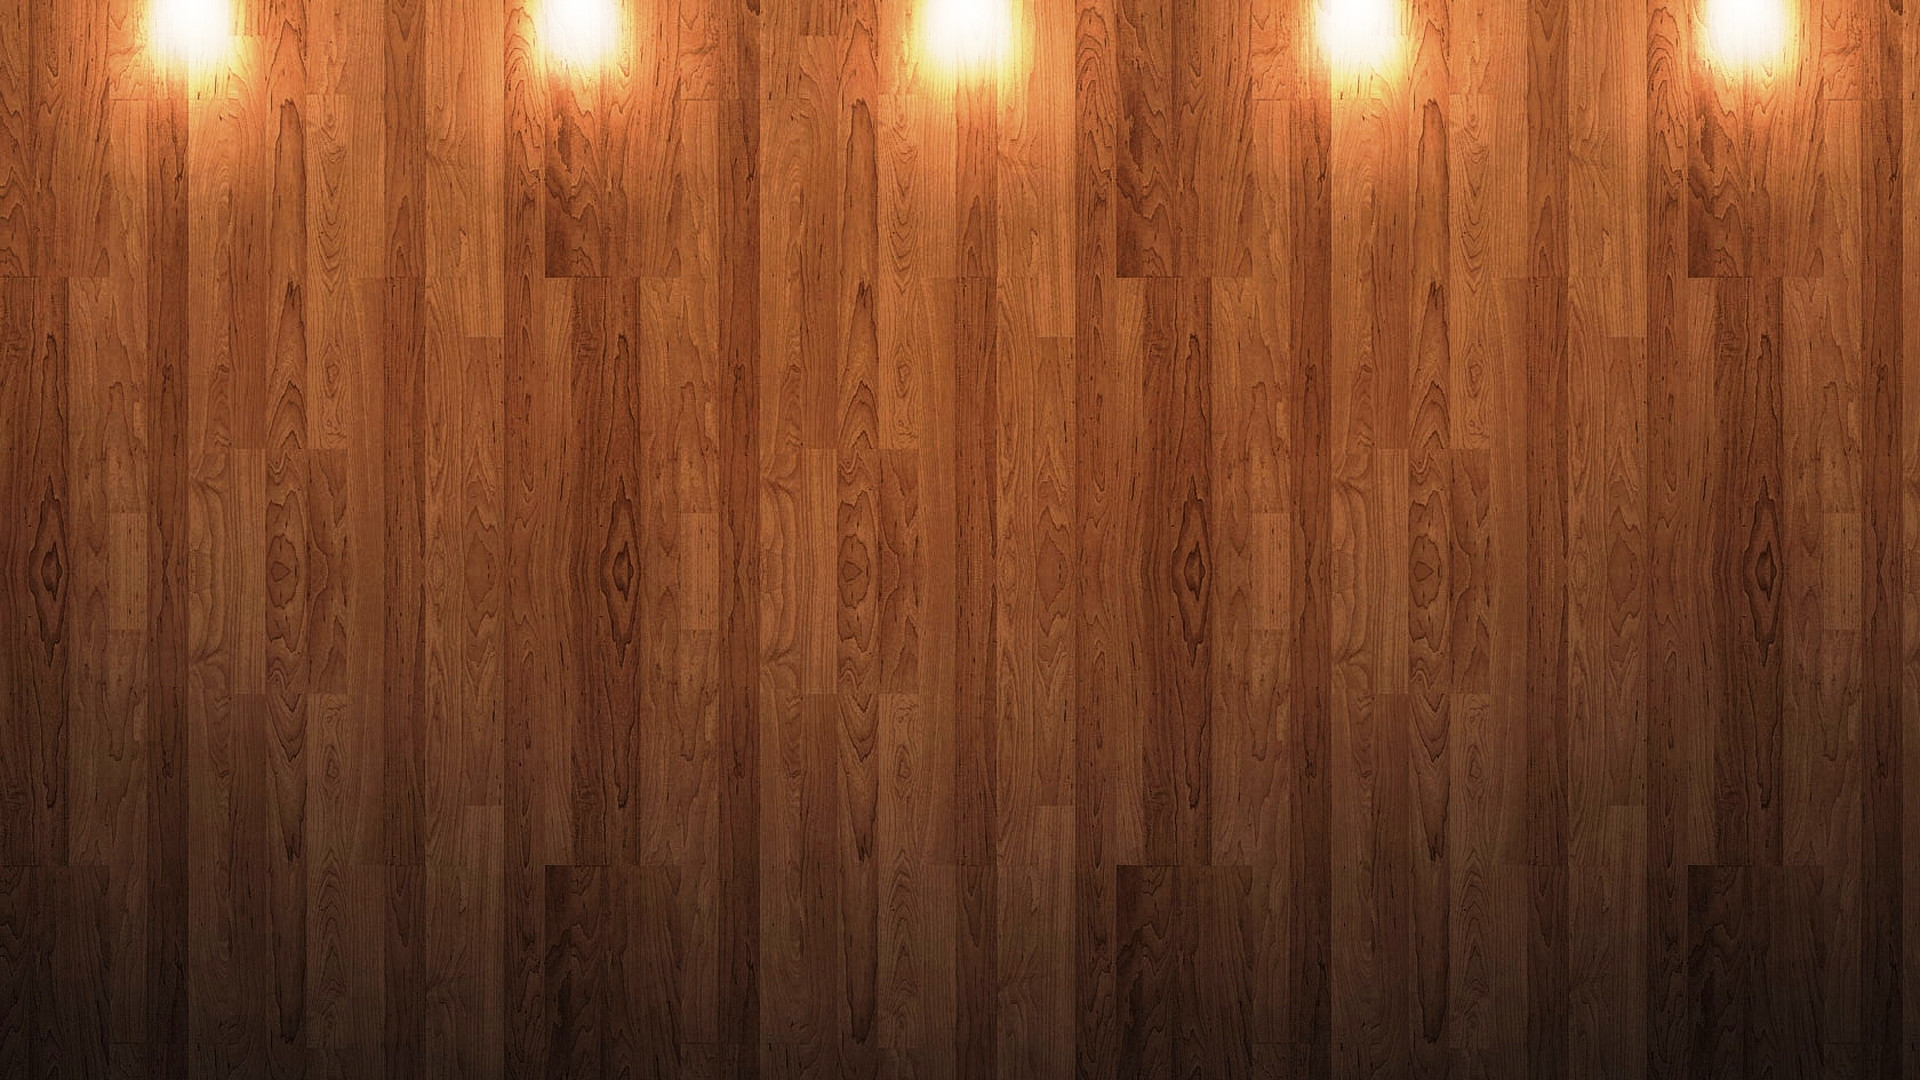 35 HD Wood Wallpapers/Backgrounds For